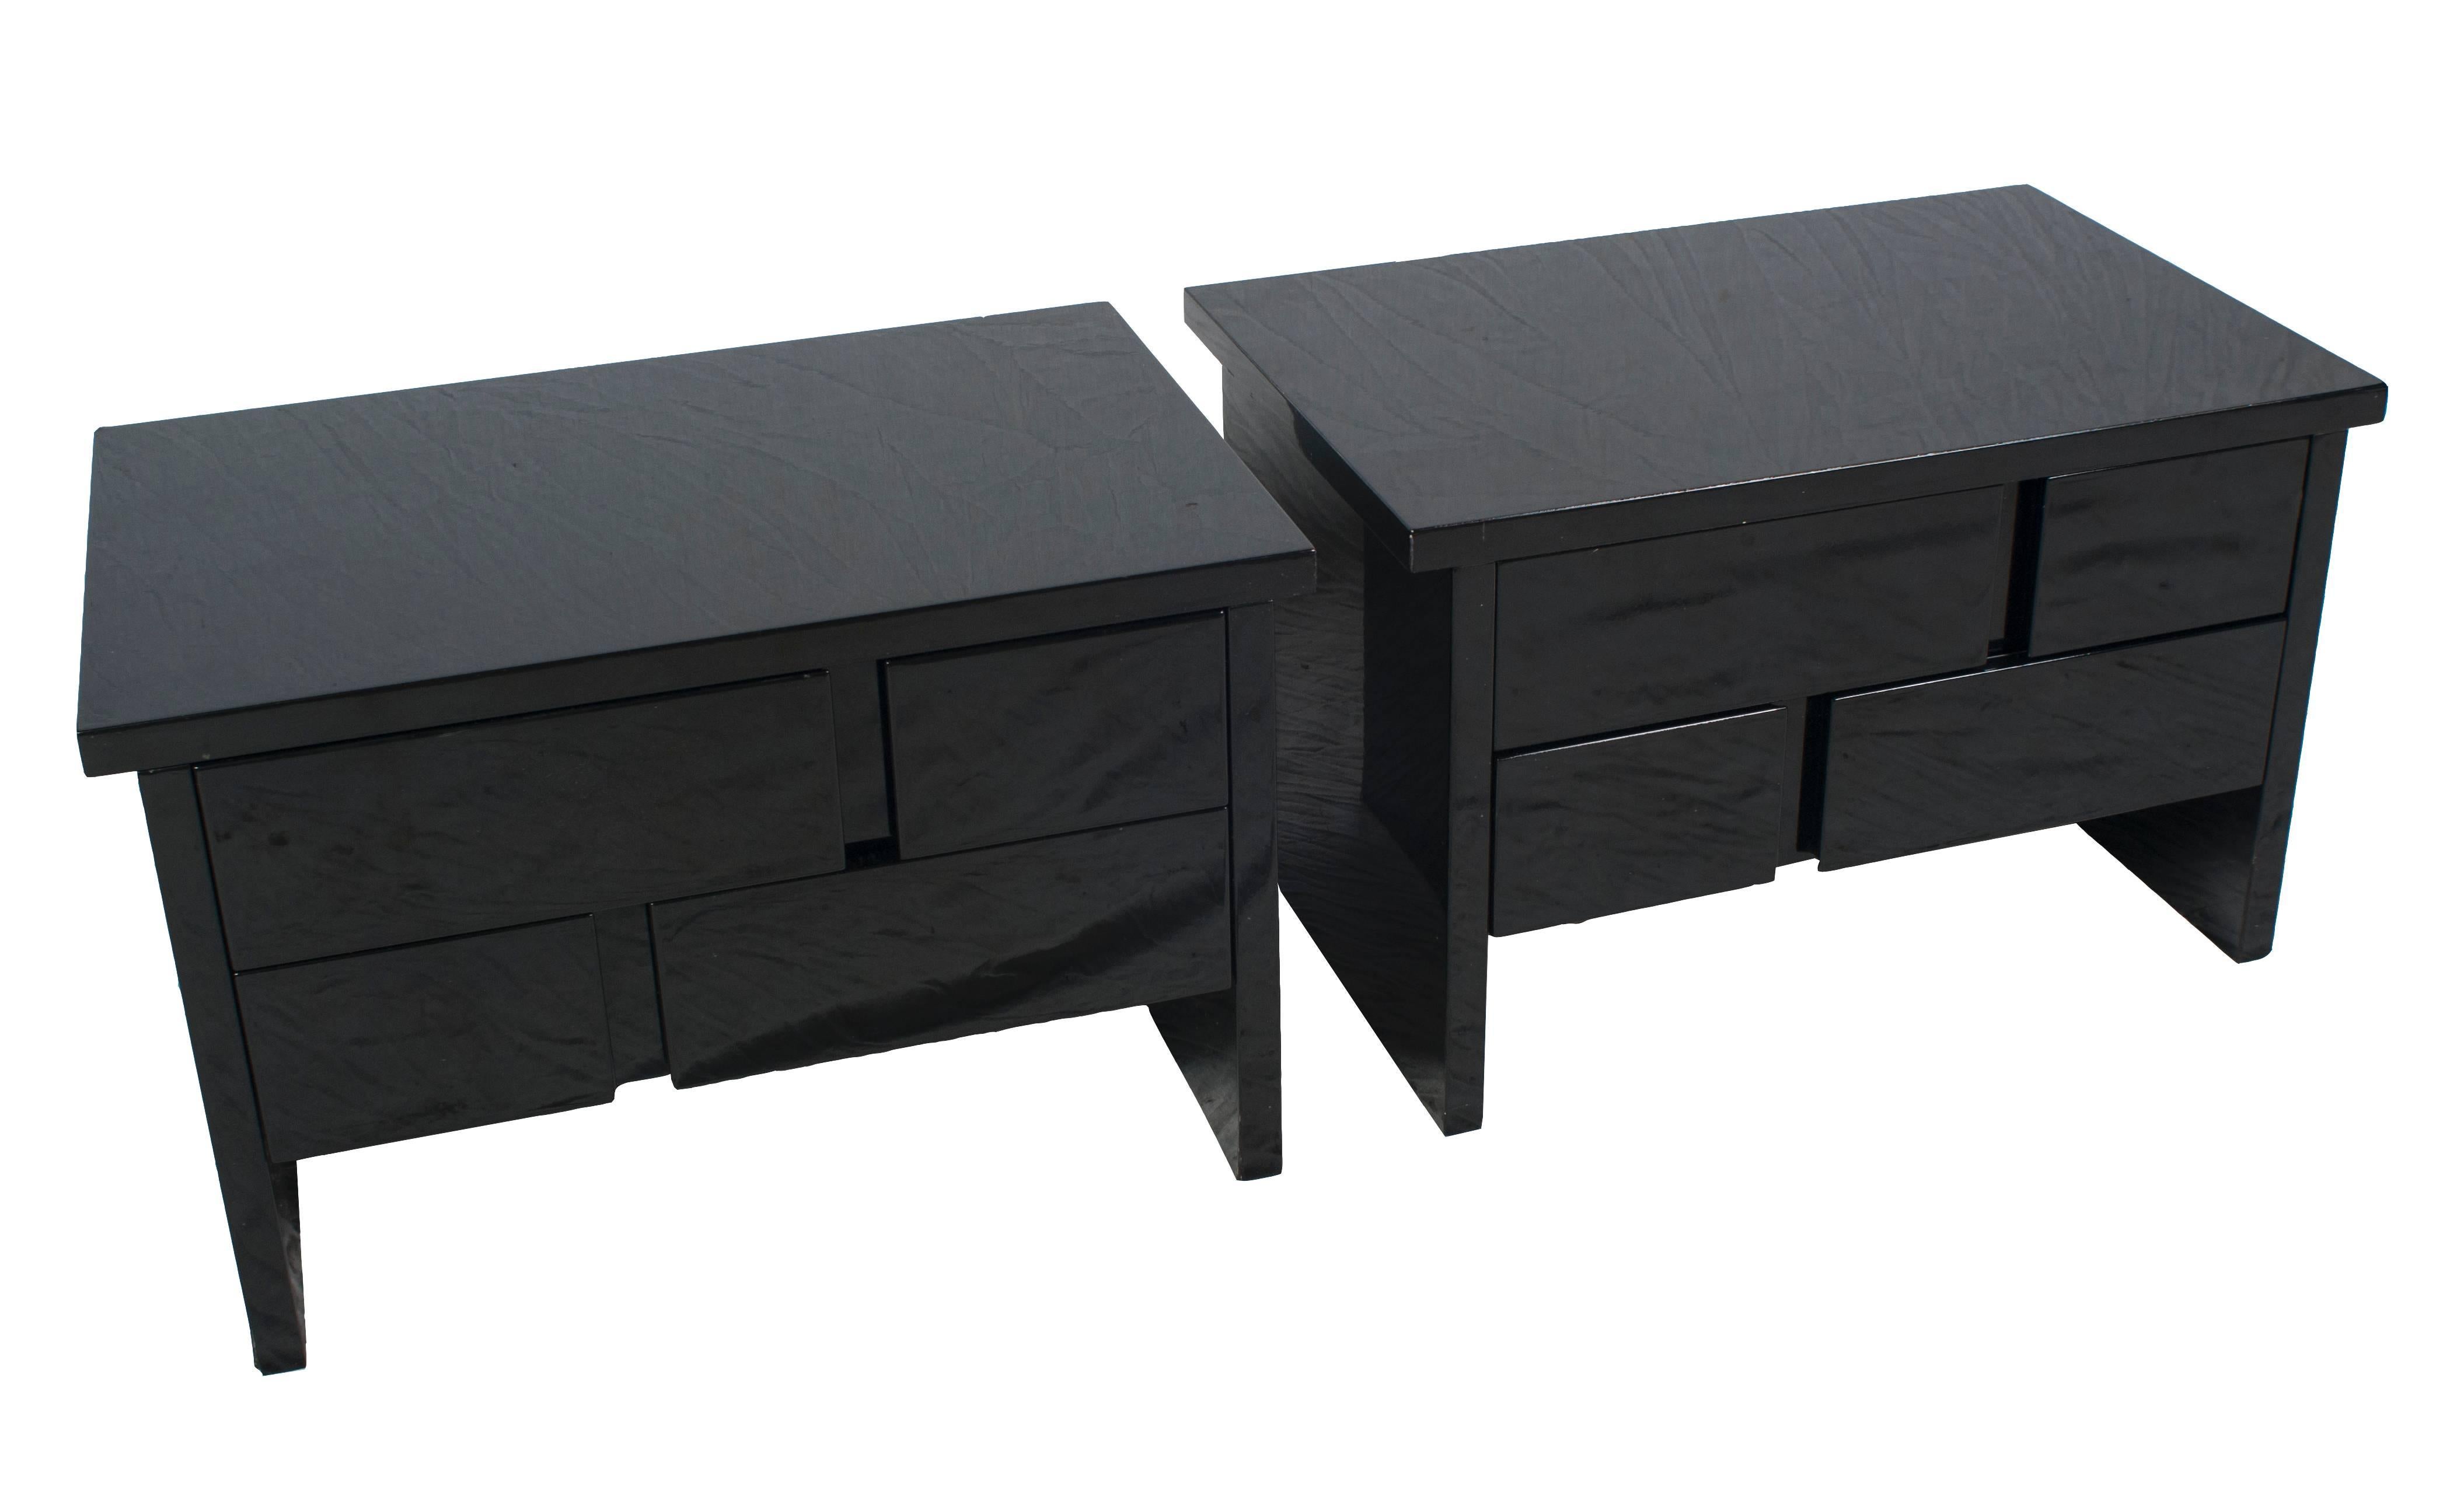 20th Century Pair of Black Lacquer Side Tables or Nightstands For Sale